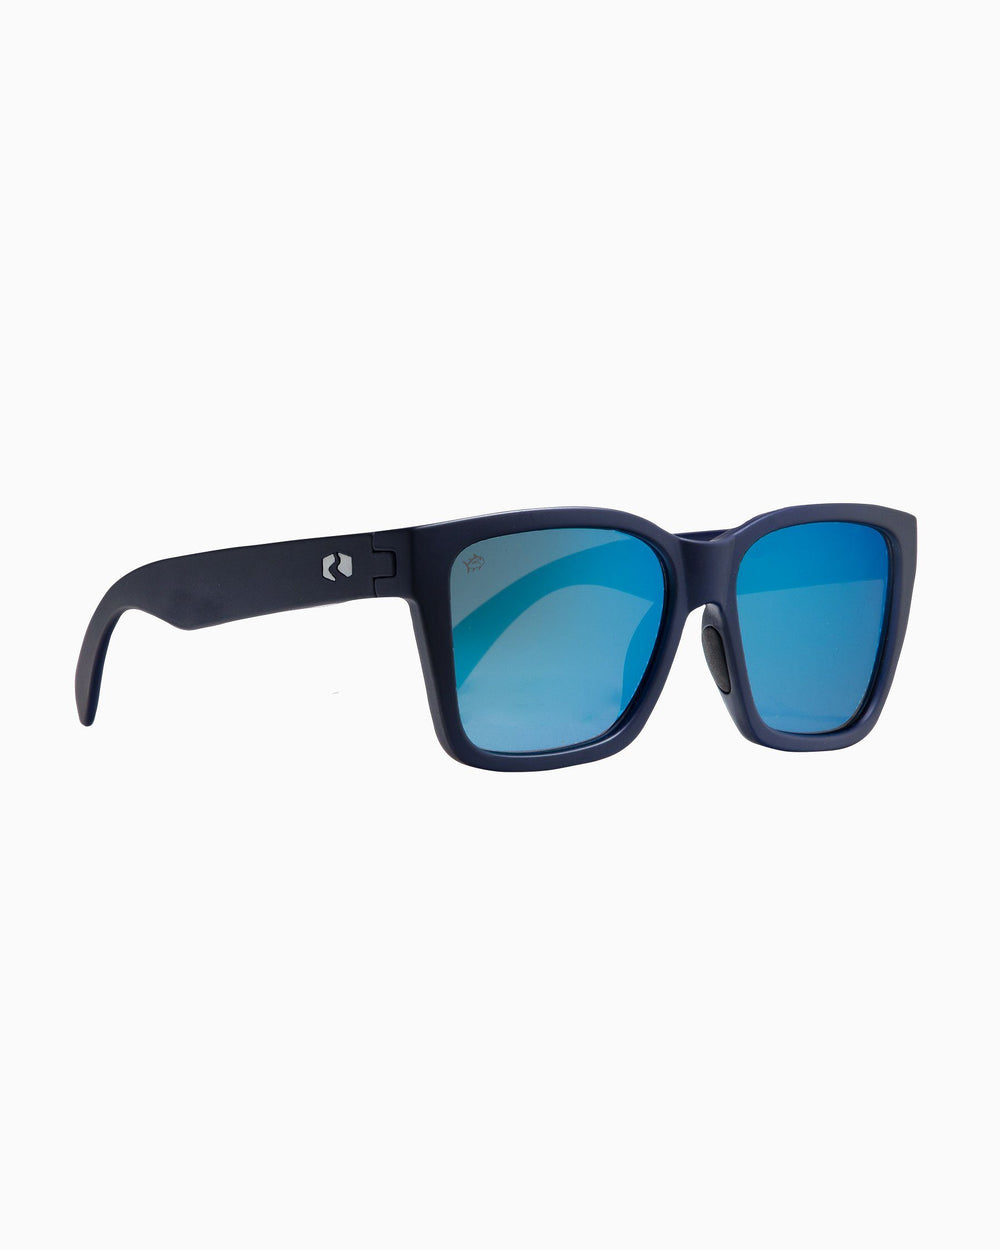 The side of the Rheos Edistos Sunglasses by Southern Tide - Boat Blue Marine